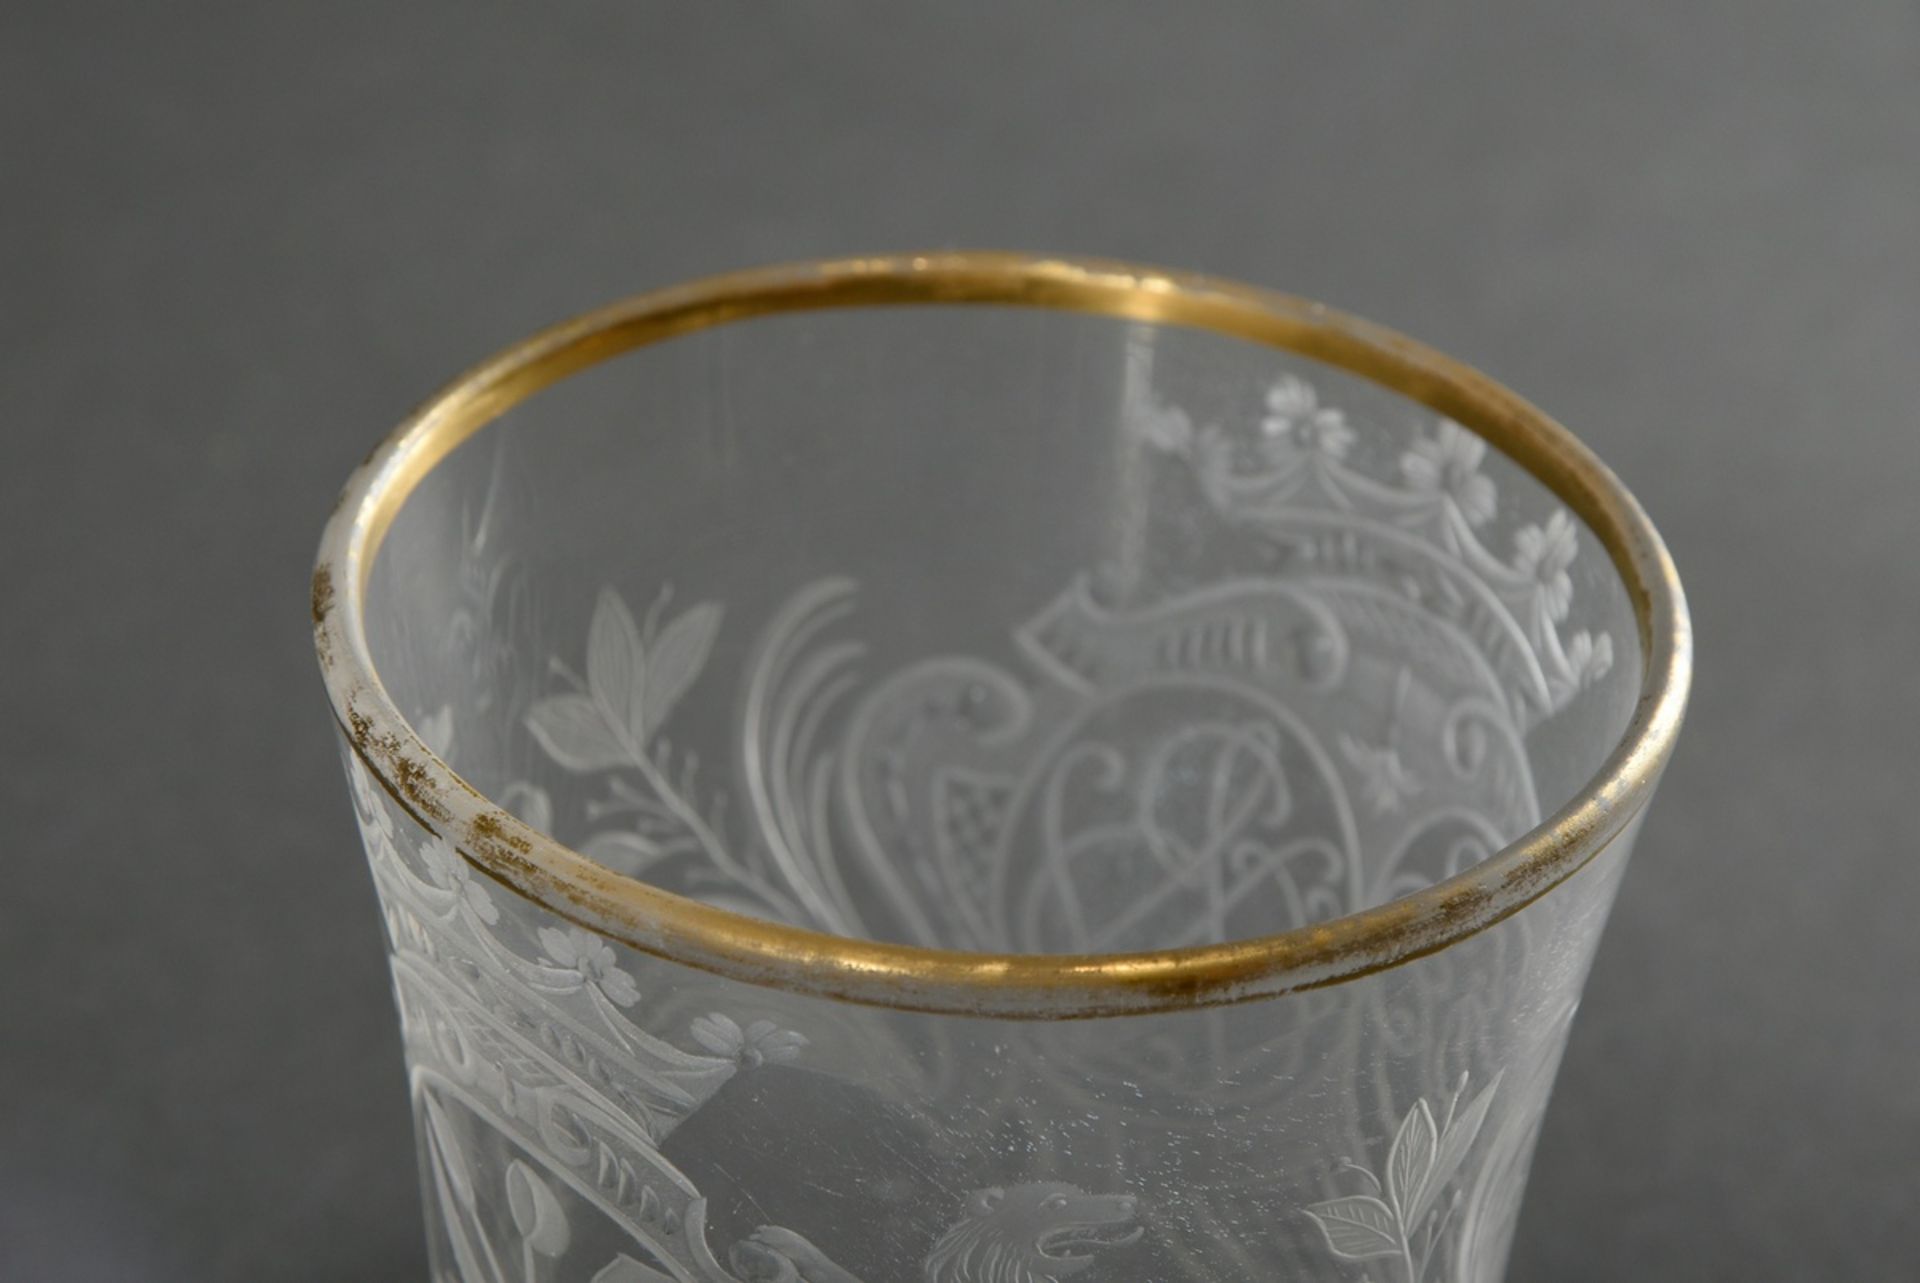 Beaker in baroque style with ligatured double monogram "HPW" and "CBW" in crowned cartouche as well - Image 3 of 4